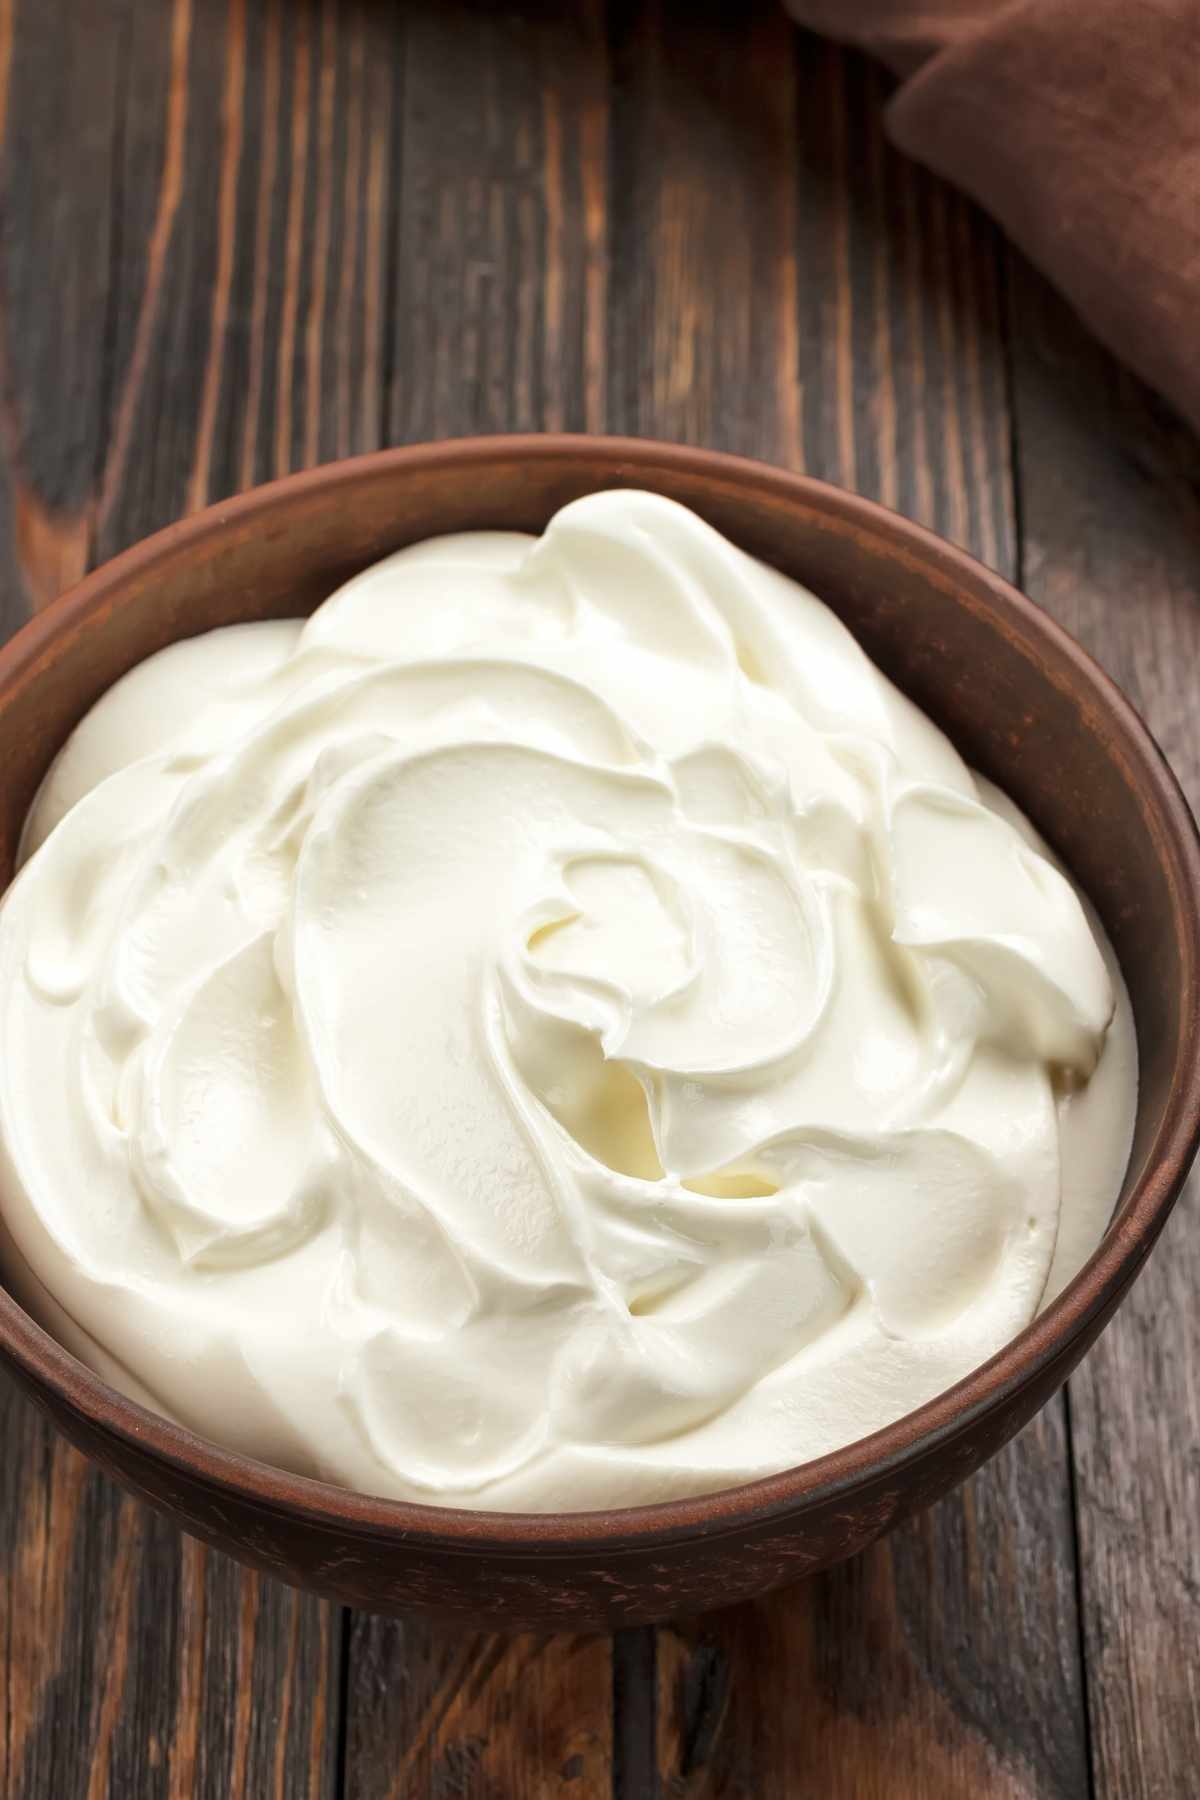 Whether you’ve run out of sour cream just when you need it, or are looking for a dairy-free alternative, we’ve collected 17 of the best sour cream substitutes. You’ll also find a recipe for homemade sour cream at the end of this article.